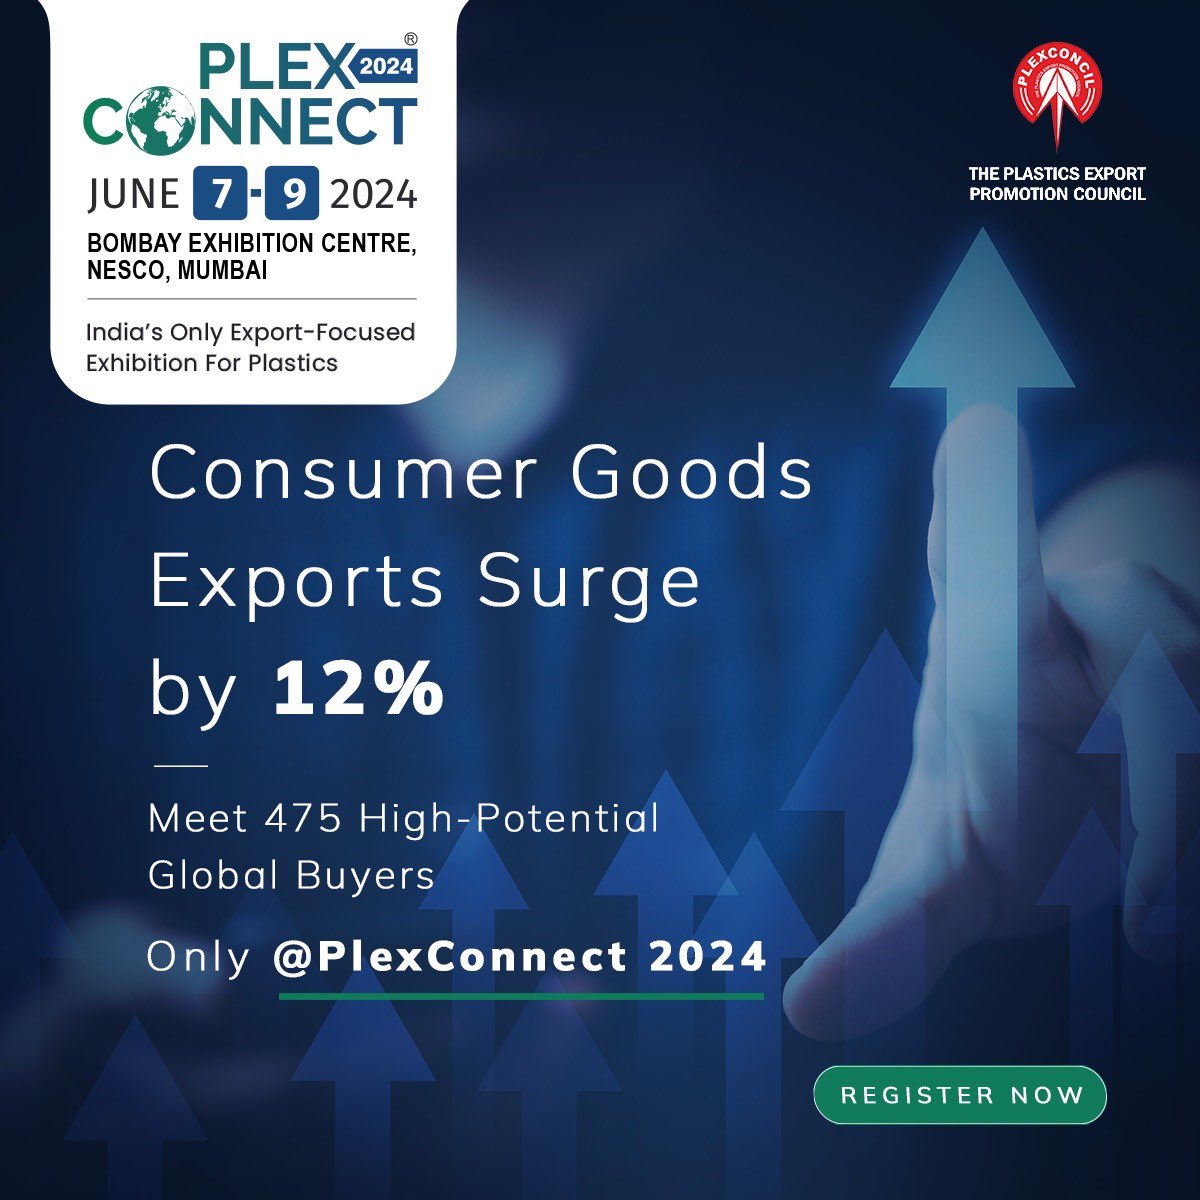 🅿️🅱️

▶️ Increased sales of plastic-made tableware, kitchenware, wallets purses, and sunglasses have led to a 12% rise in India’s consumer goods exports. #PlexConnect #PlasticExport #PlasticExhibition #PlasticInnovation #Networking #Technology #PlasticManufacturing #PolymerBazaar